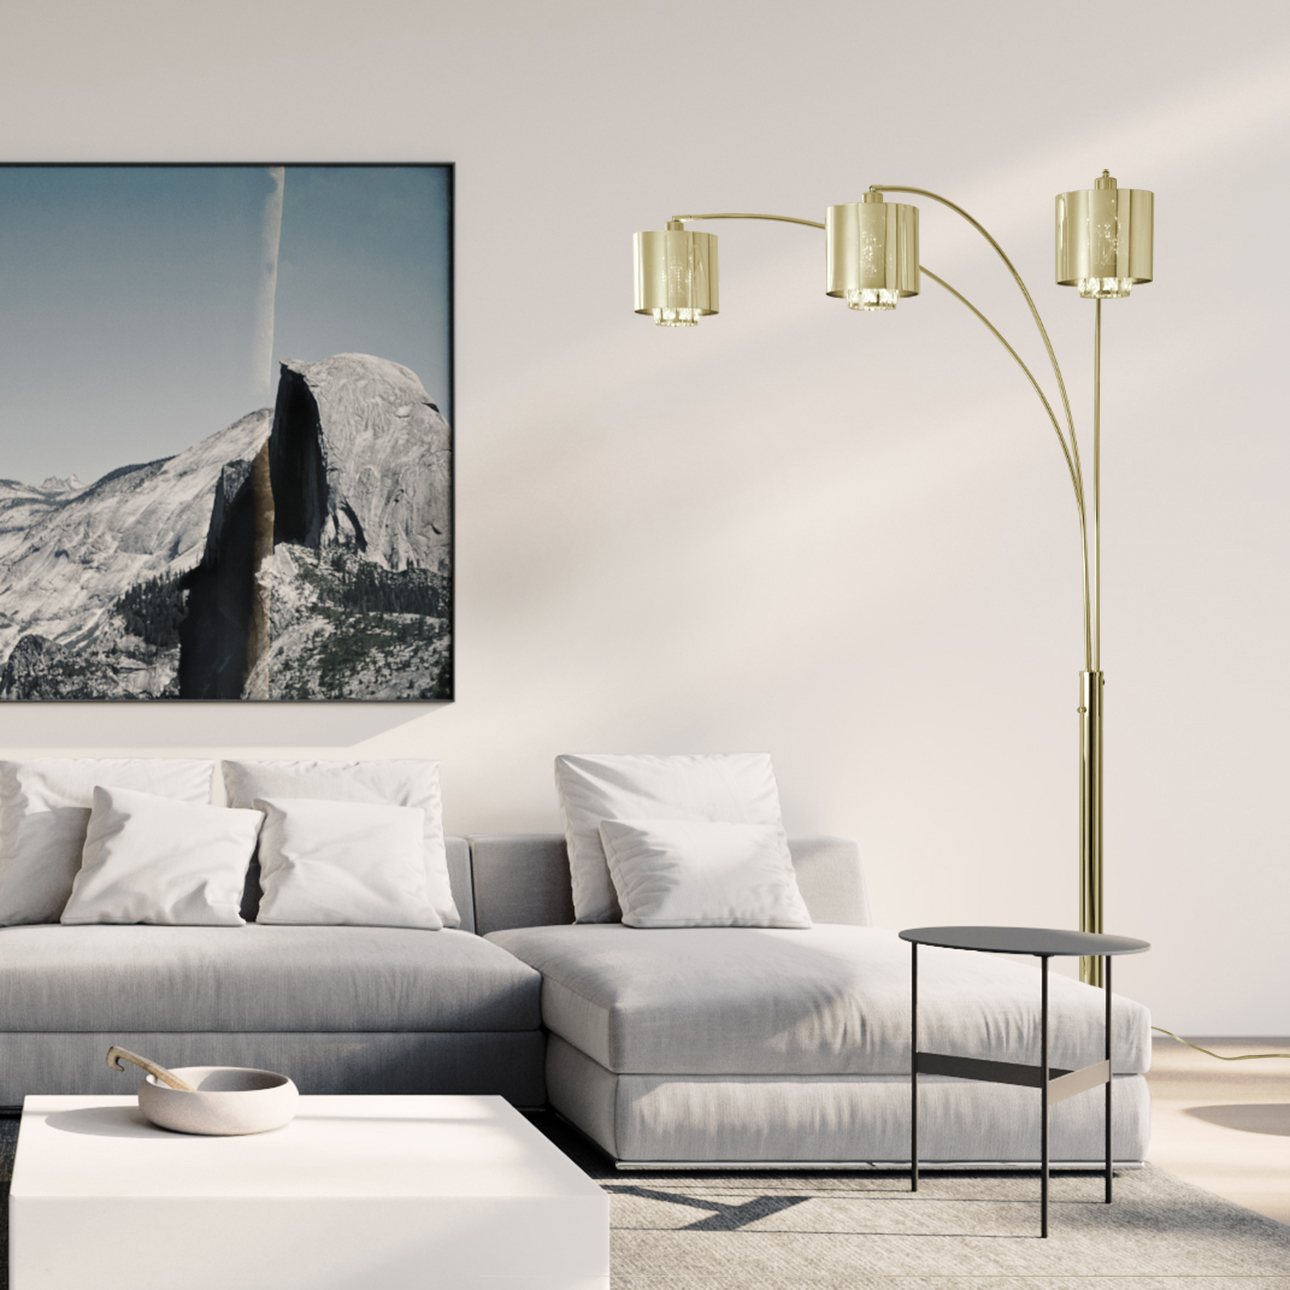 Marilyn 90″ 3 Light Arc Floor Lamp – Weathered Brass, Mylar & Crystal Shade, Rotary On/Off Switch, mable base